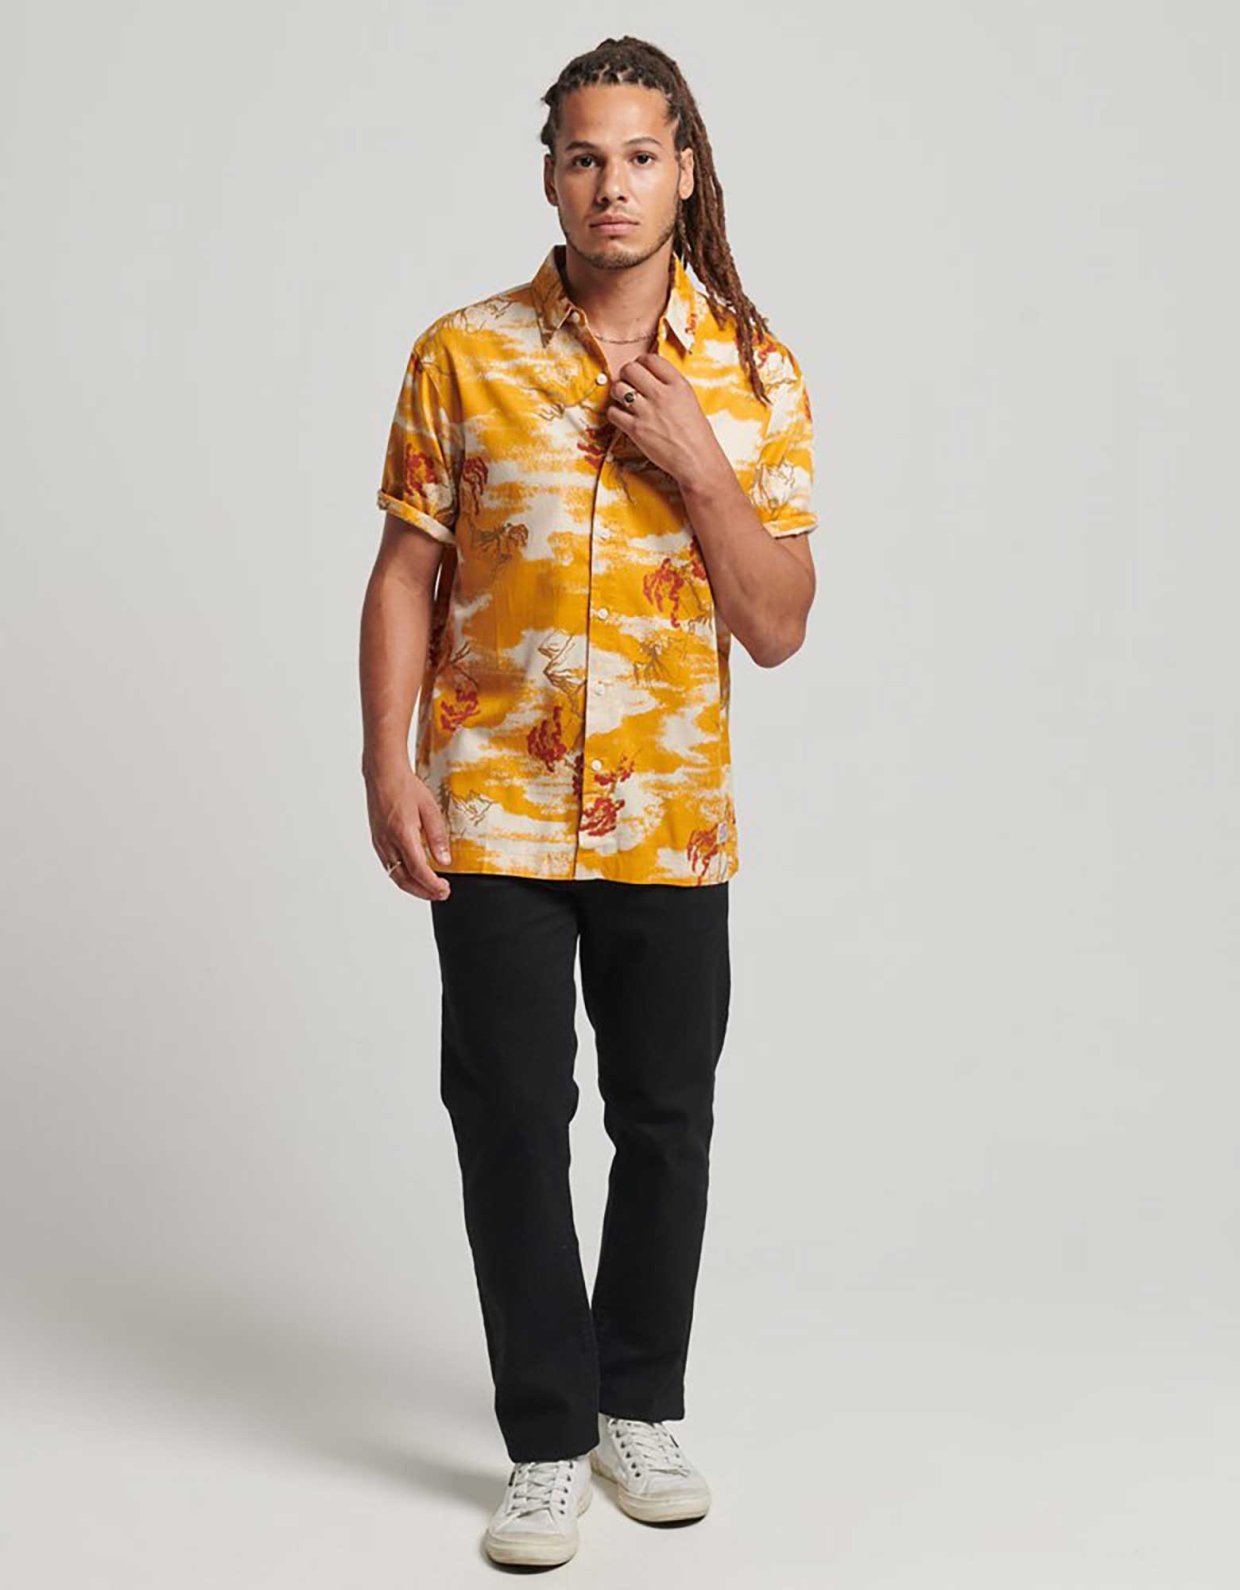 Superdry Vintage Hawaiian s/s shirt yellow clouds